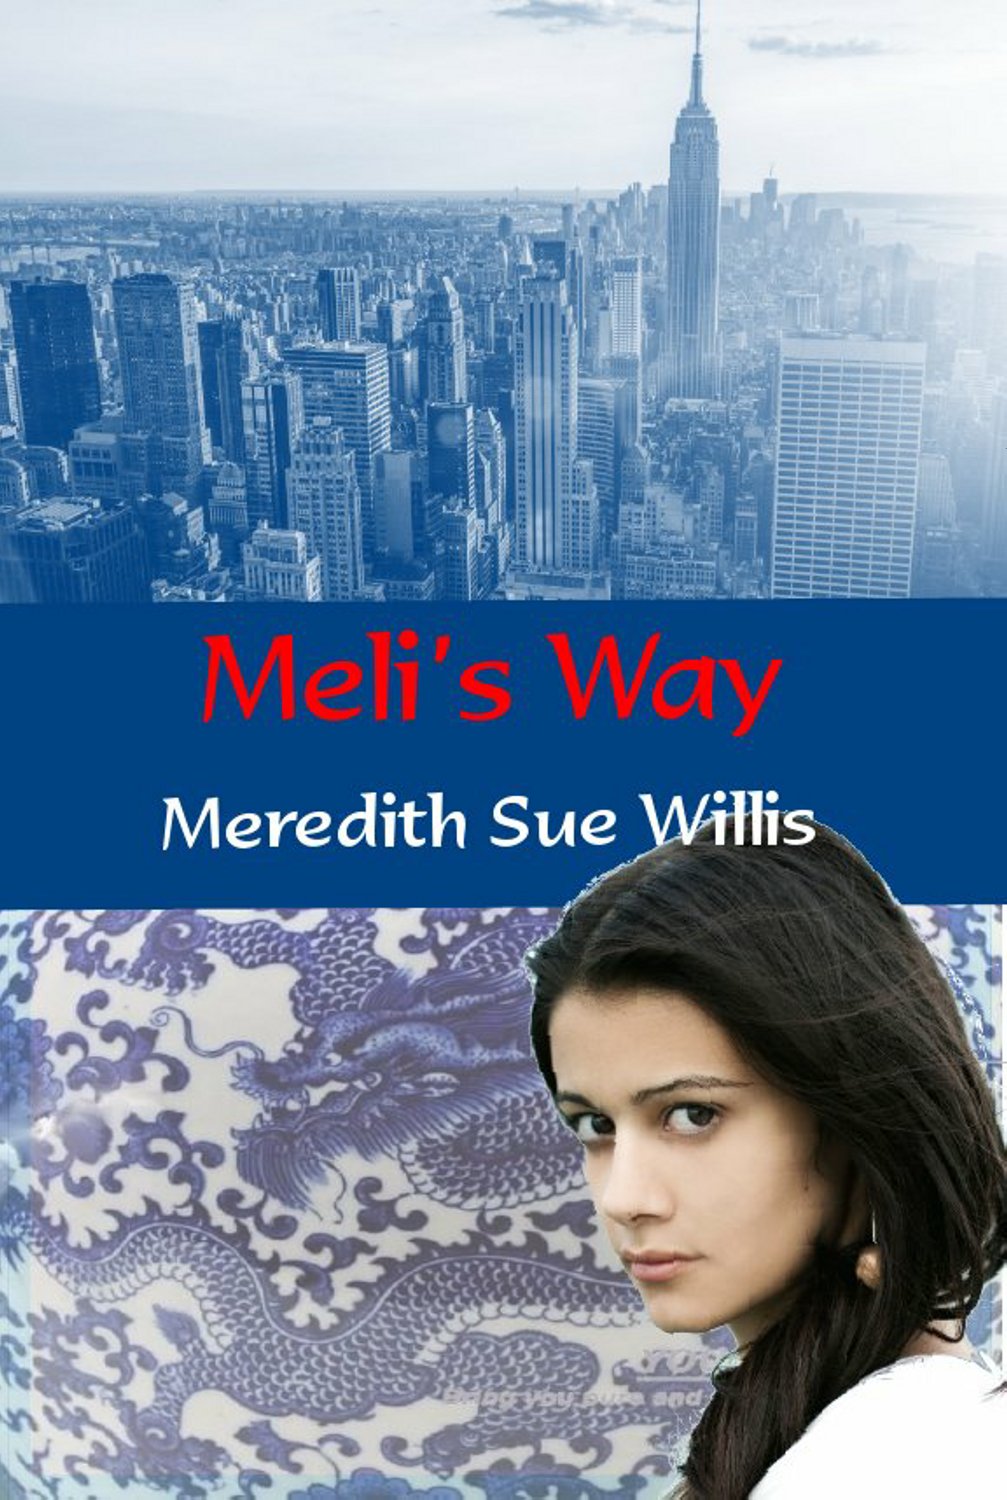  Meli's Way Book Cover Book Cover Image